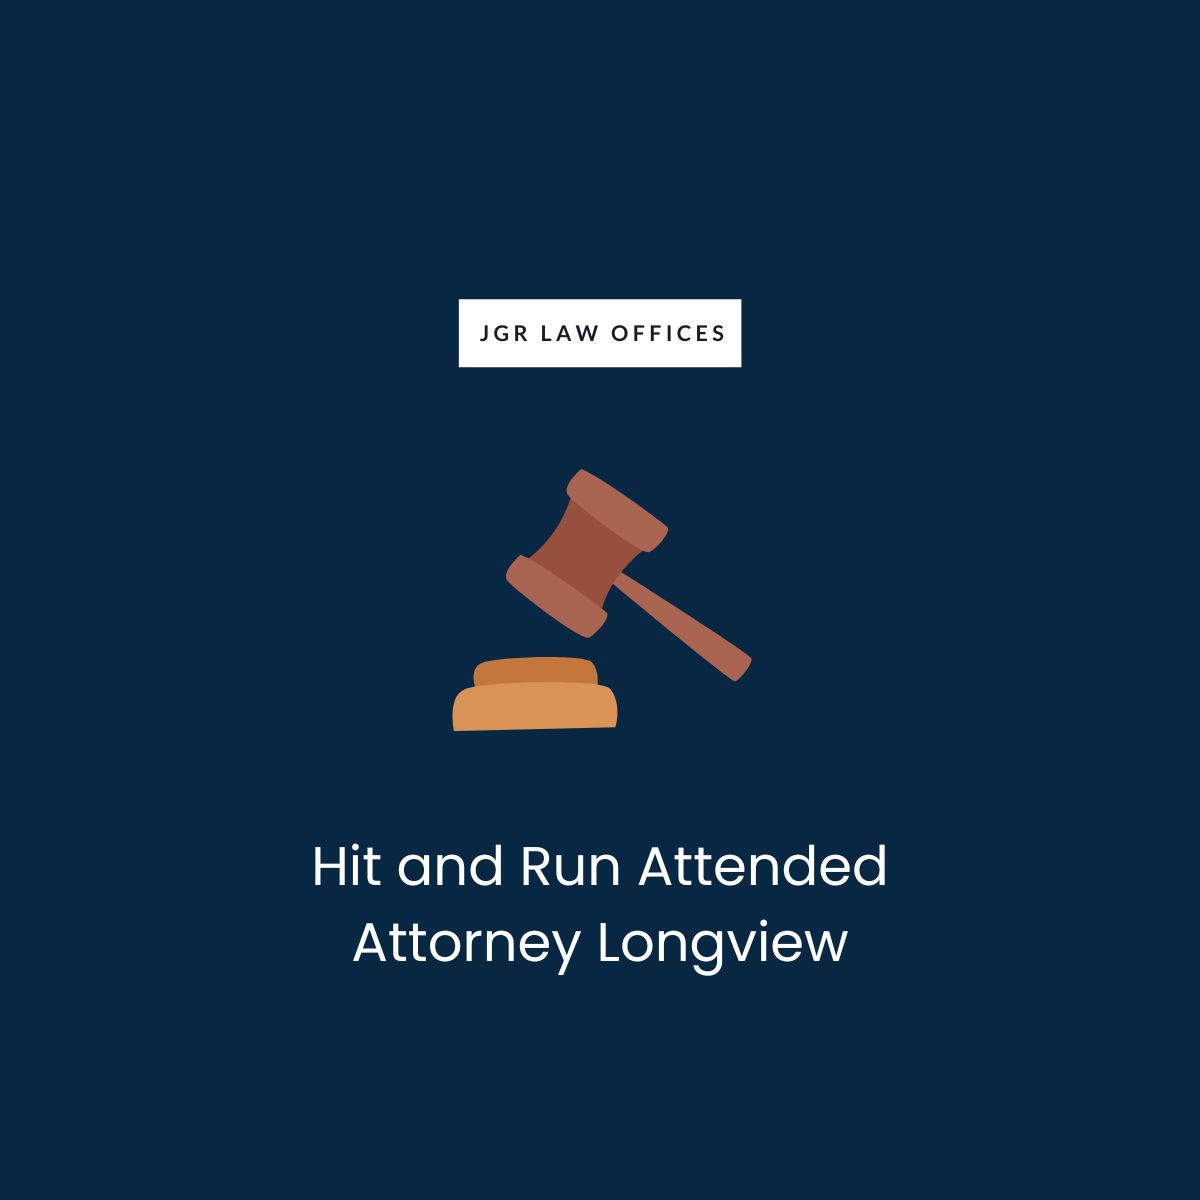 Hit and Run Attended Attorney Longview